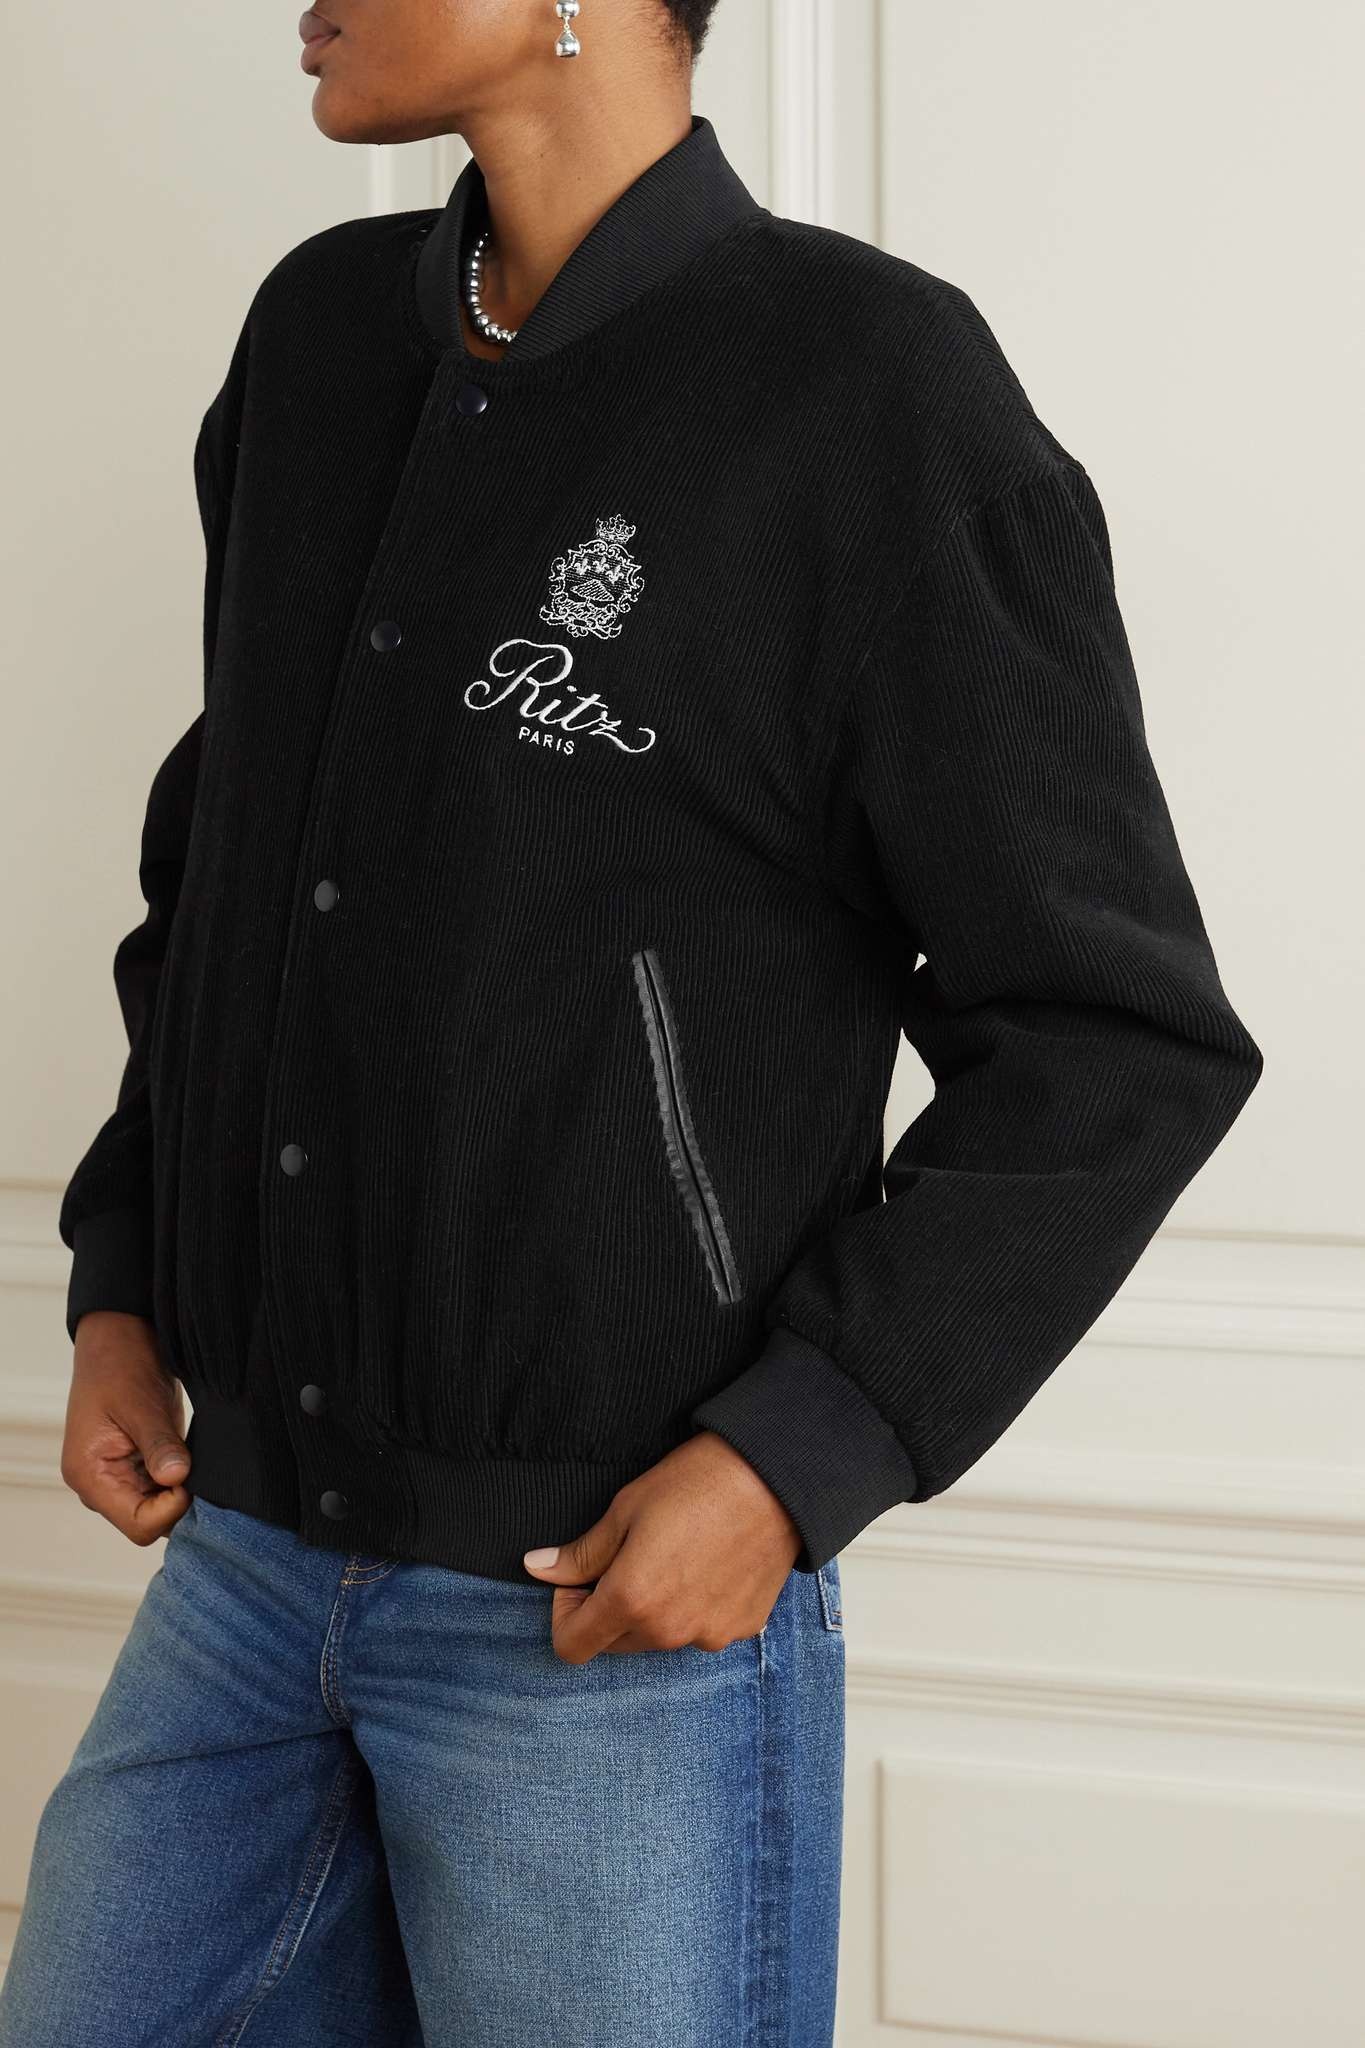 + Ritz Paris embroidered leather-trimmed cotton and wool-blend corduroy bomber jacket - 3